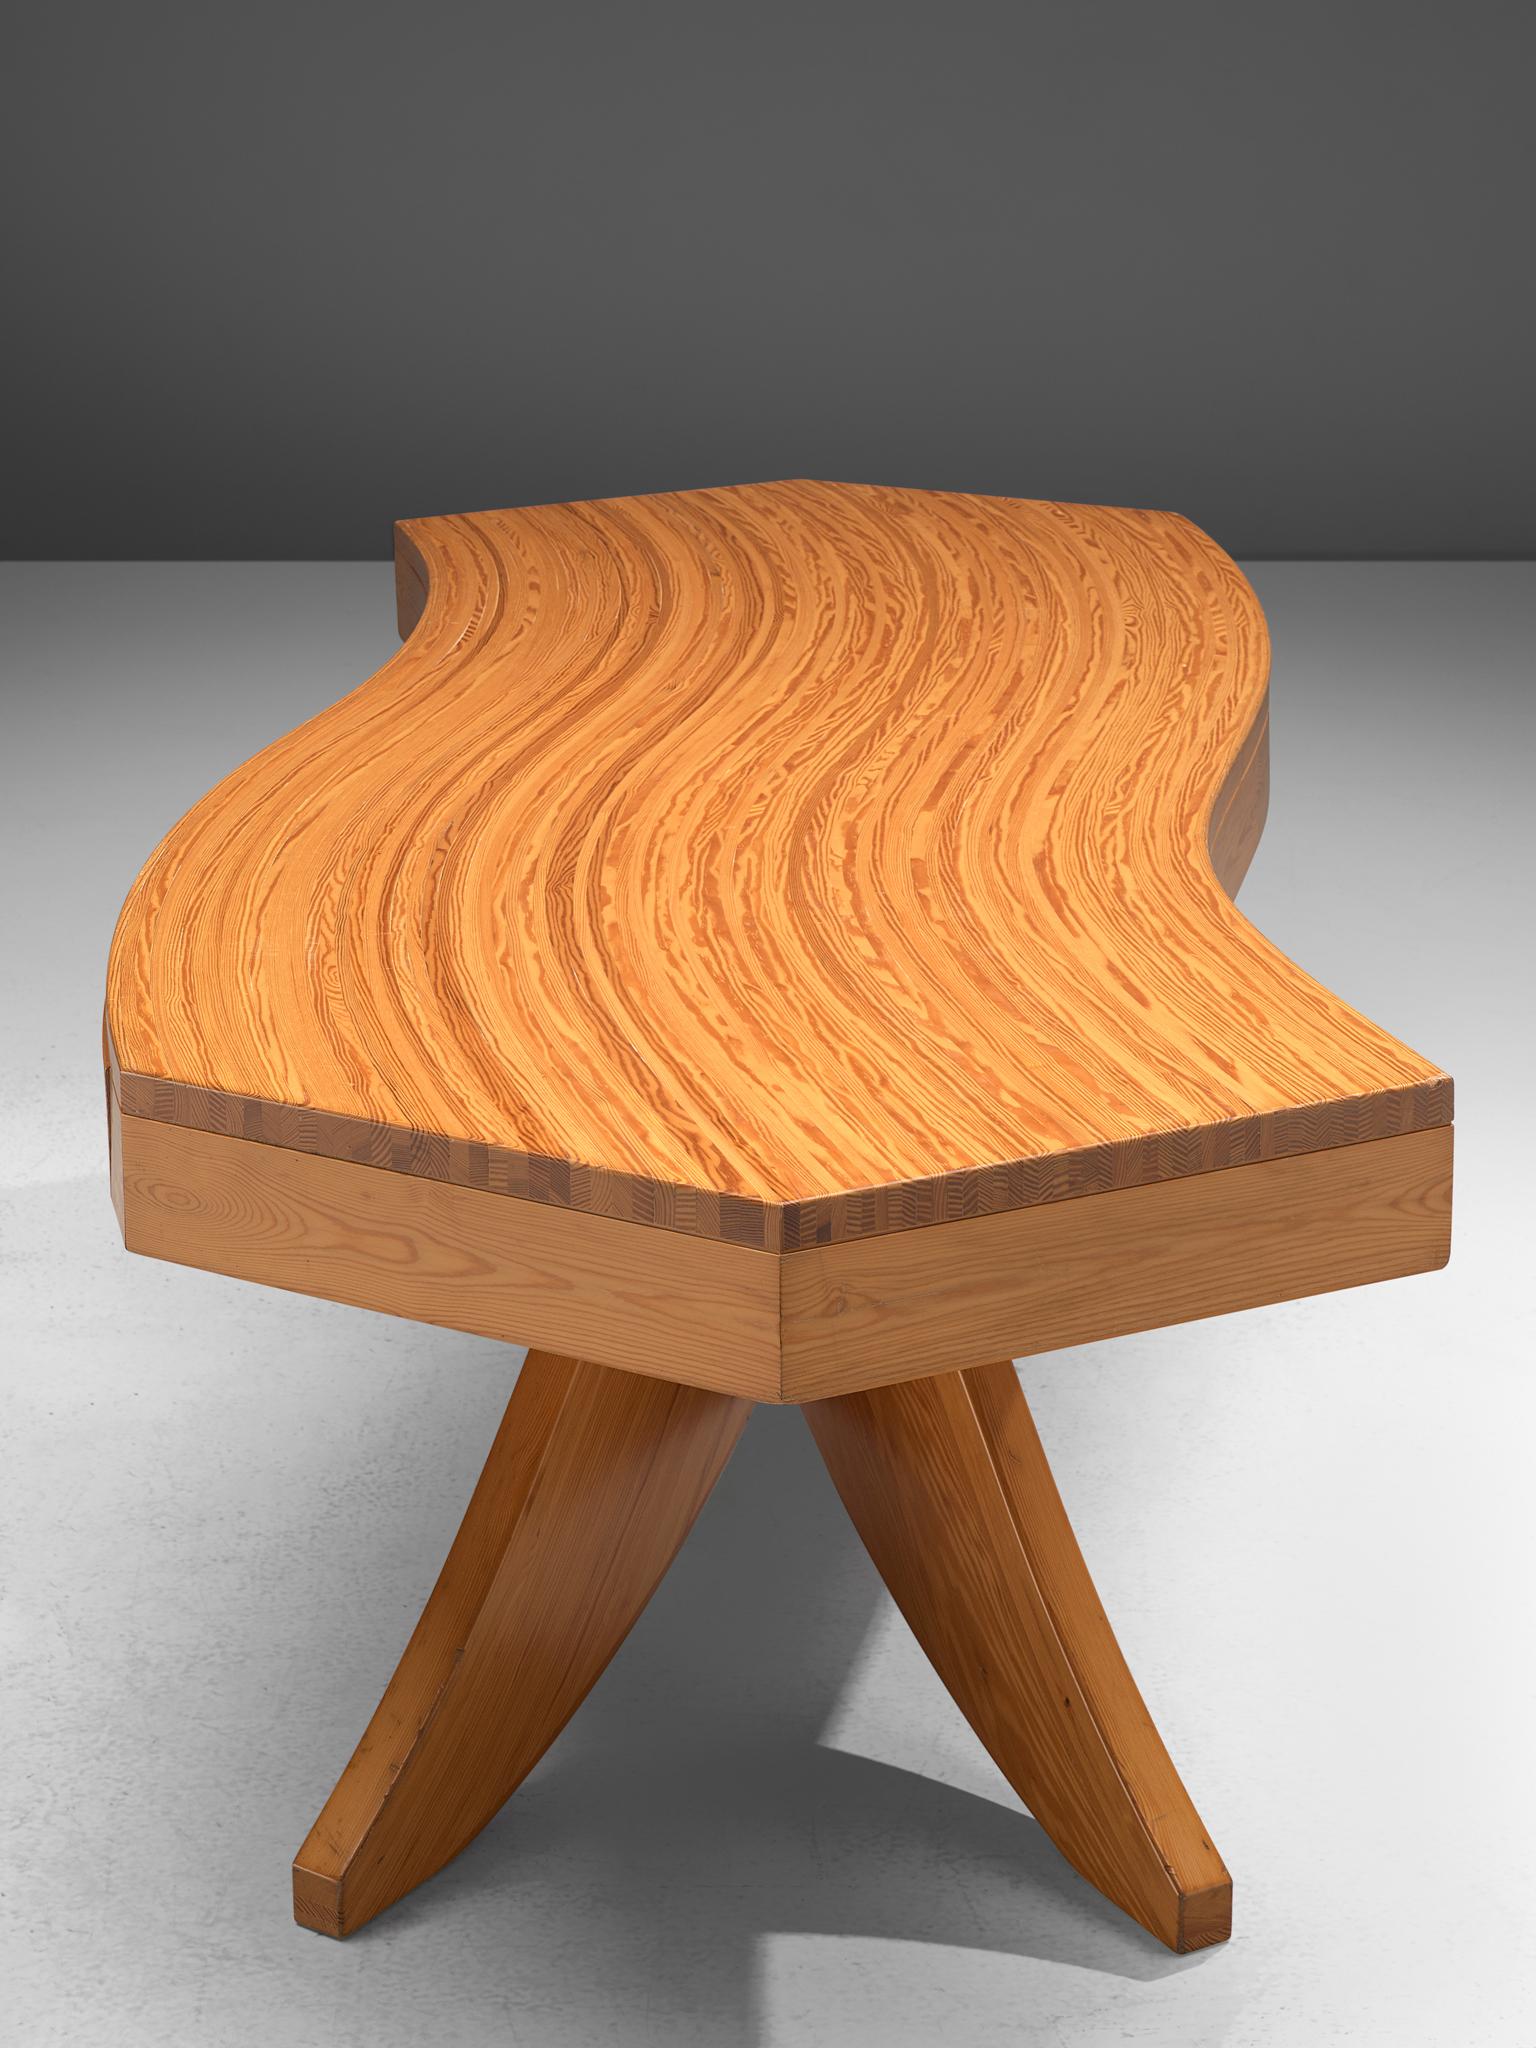 Scandinavian Pine Table with Curved Table Top 3